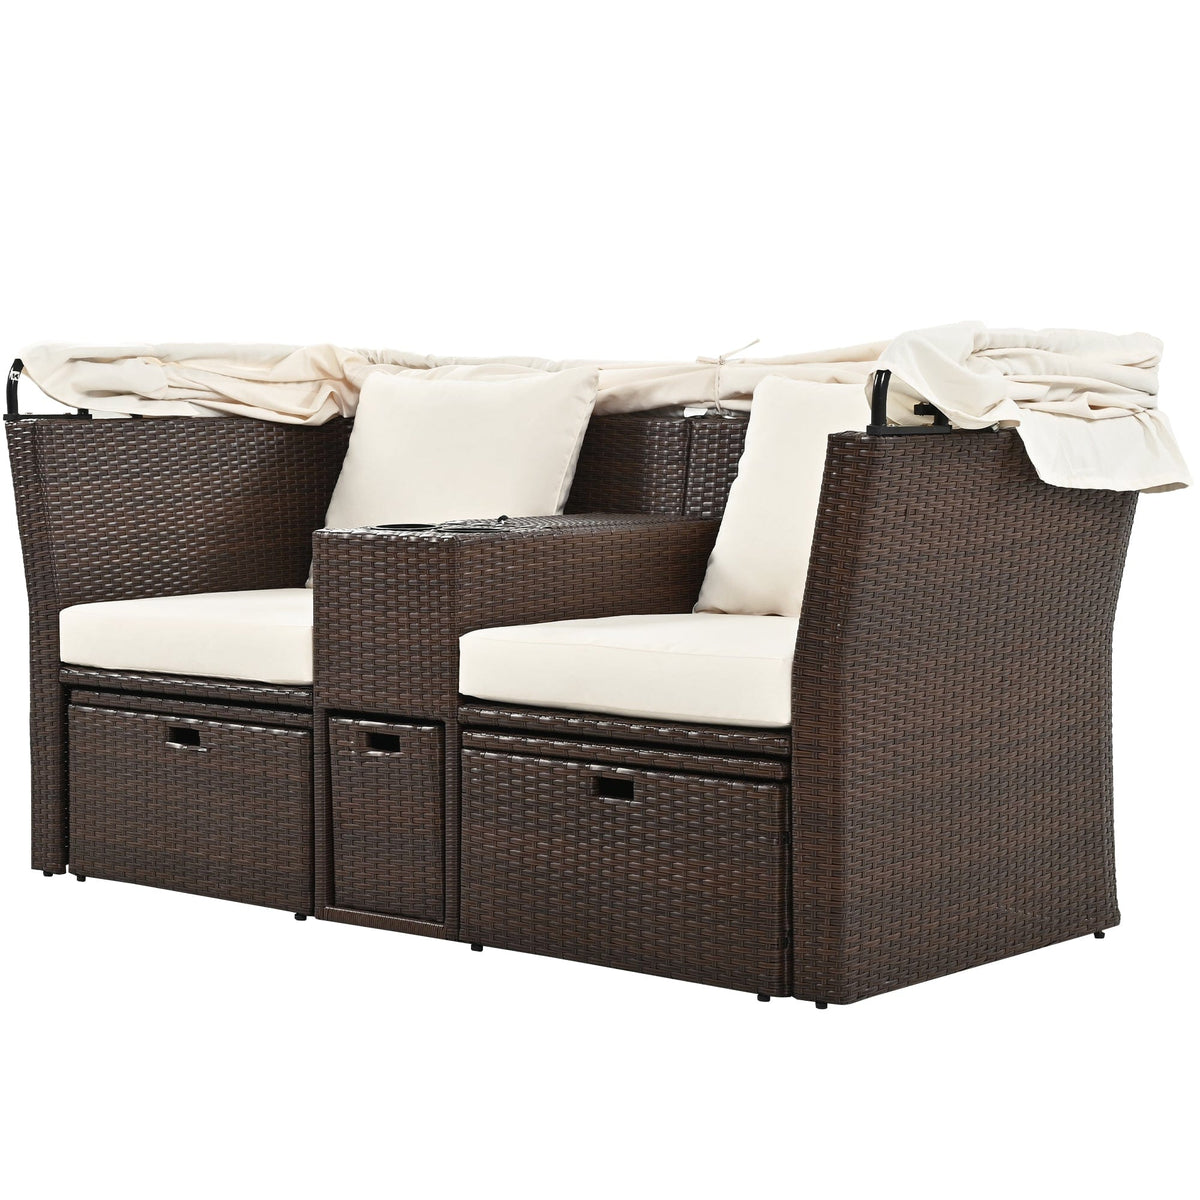 2-Seater Outdoor Patio Daybed - White